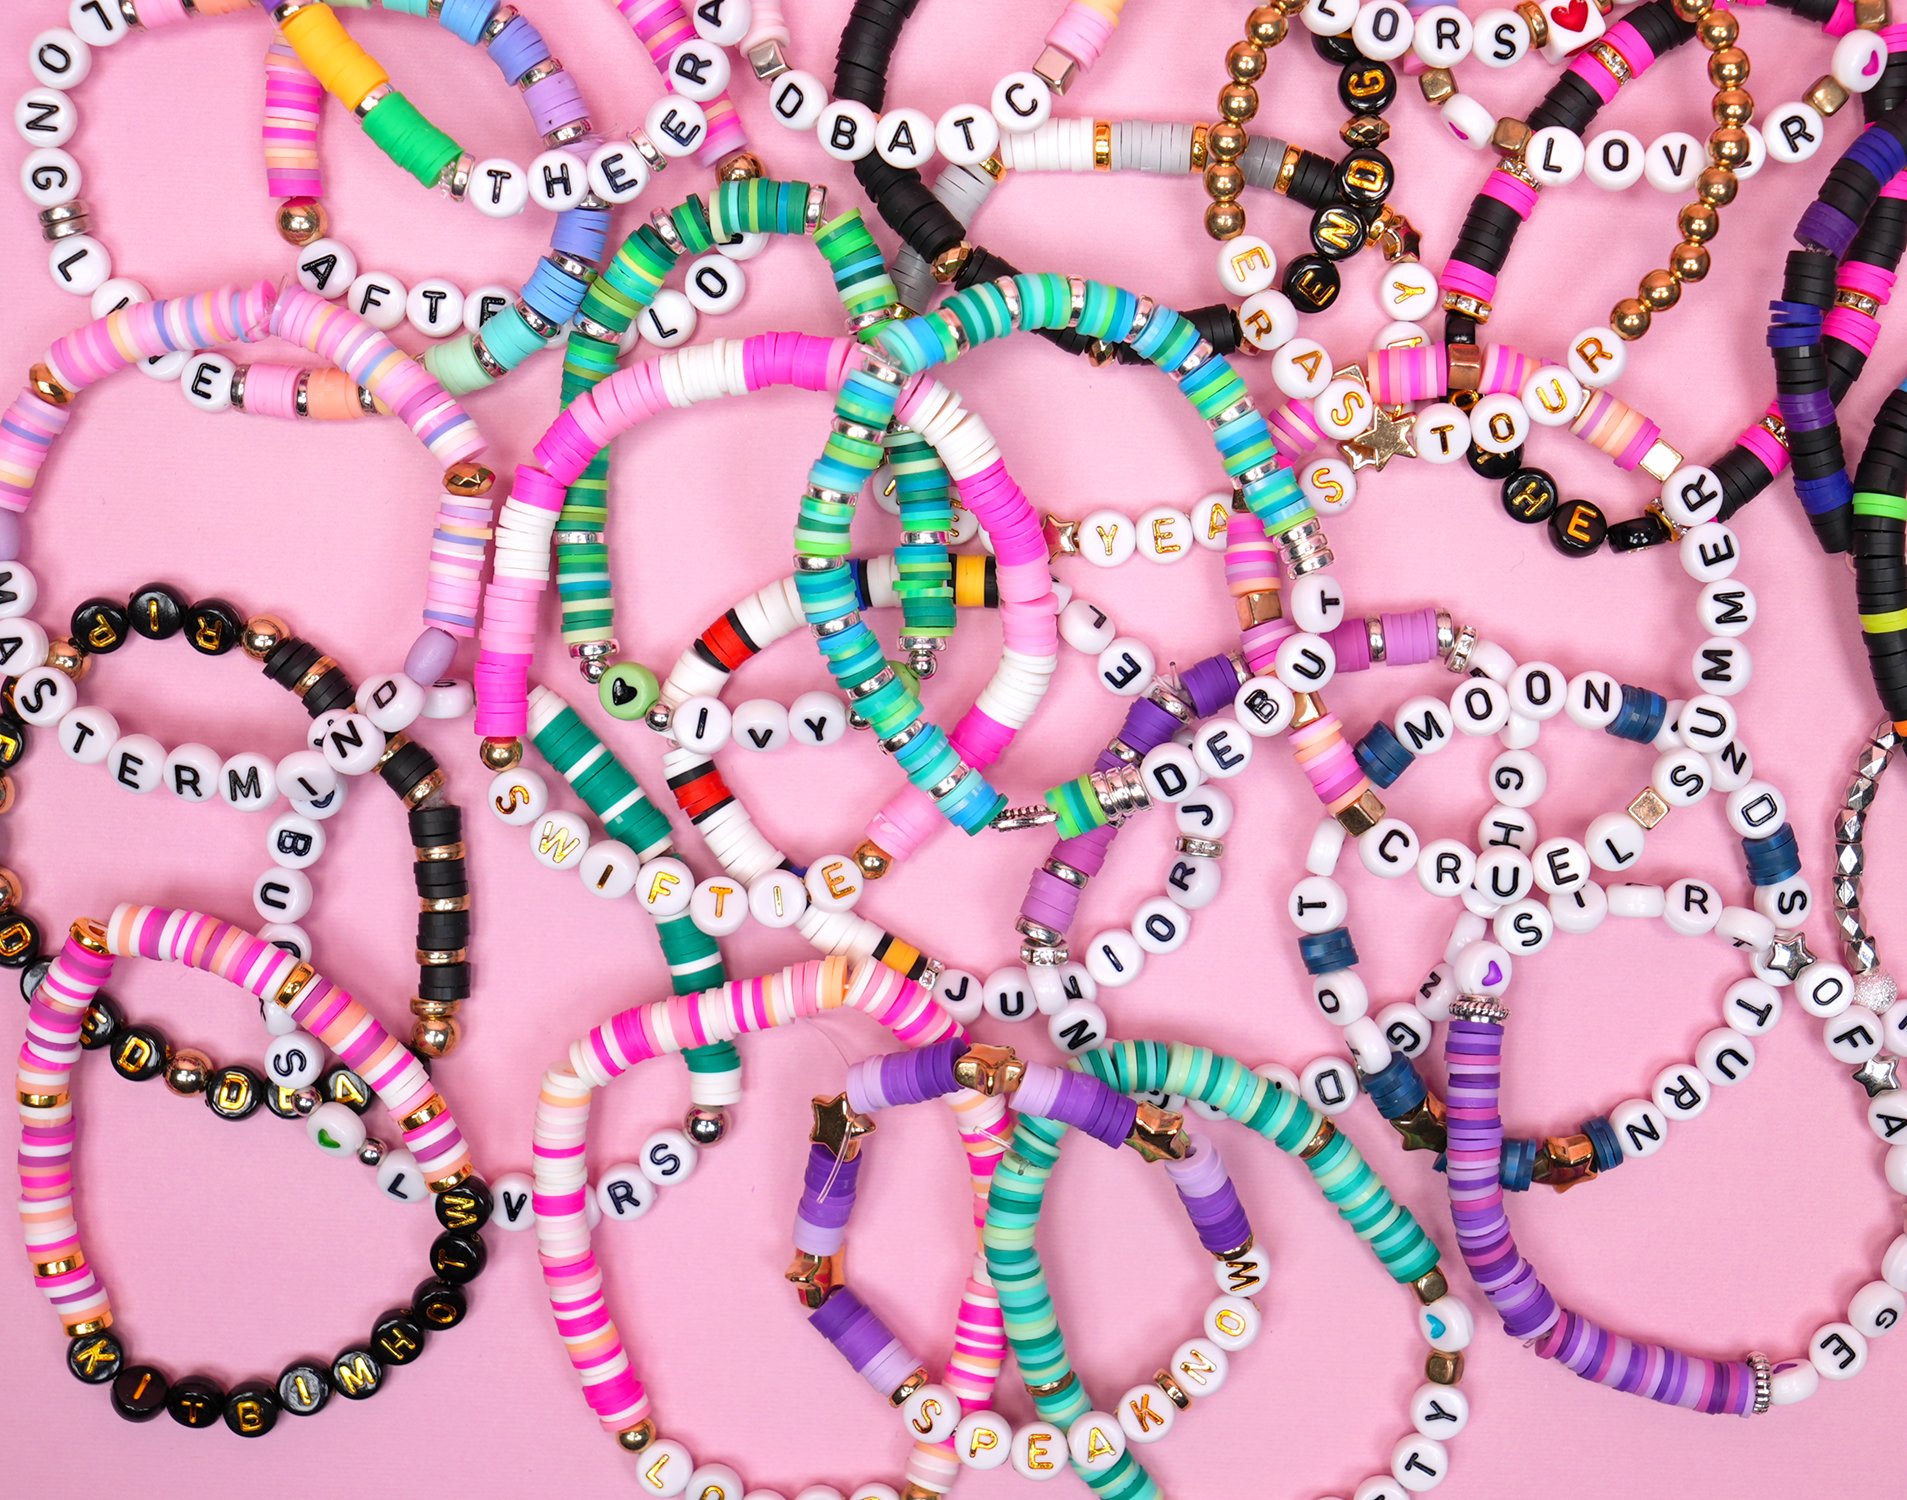 Pile of many colorful beaded Taylor Swift Eras Tour friendship bracelets on a pink background